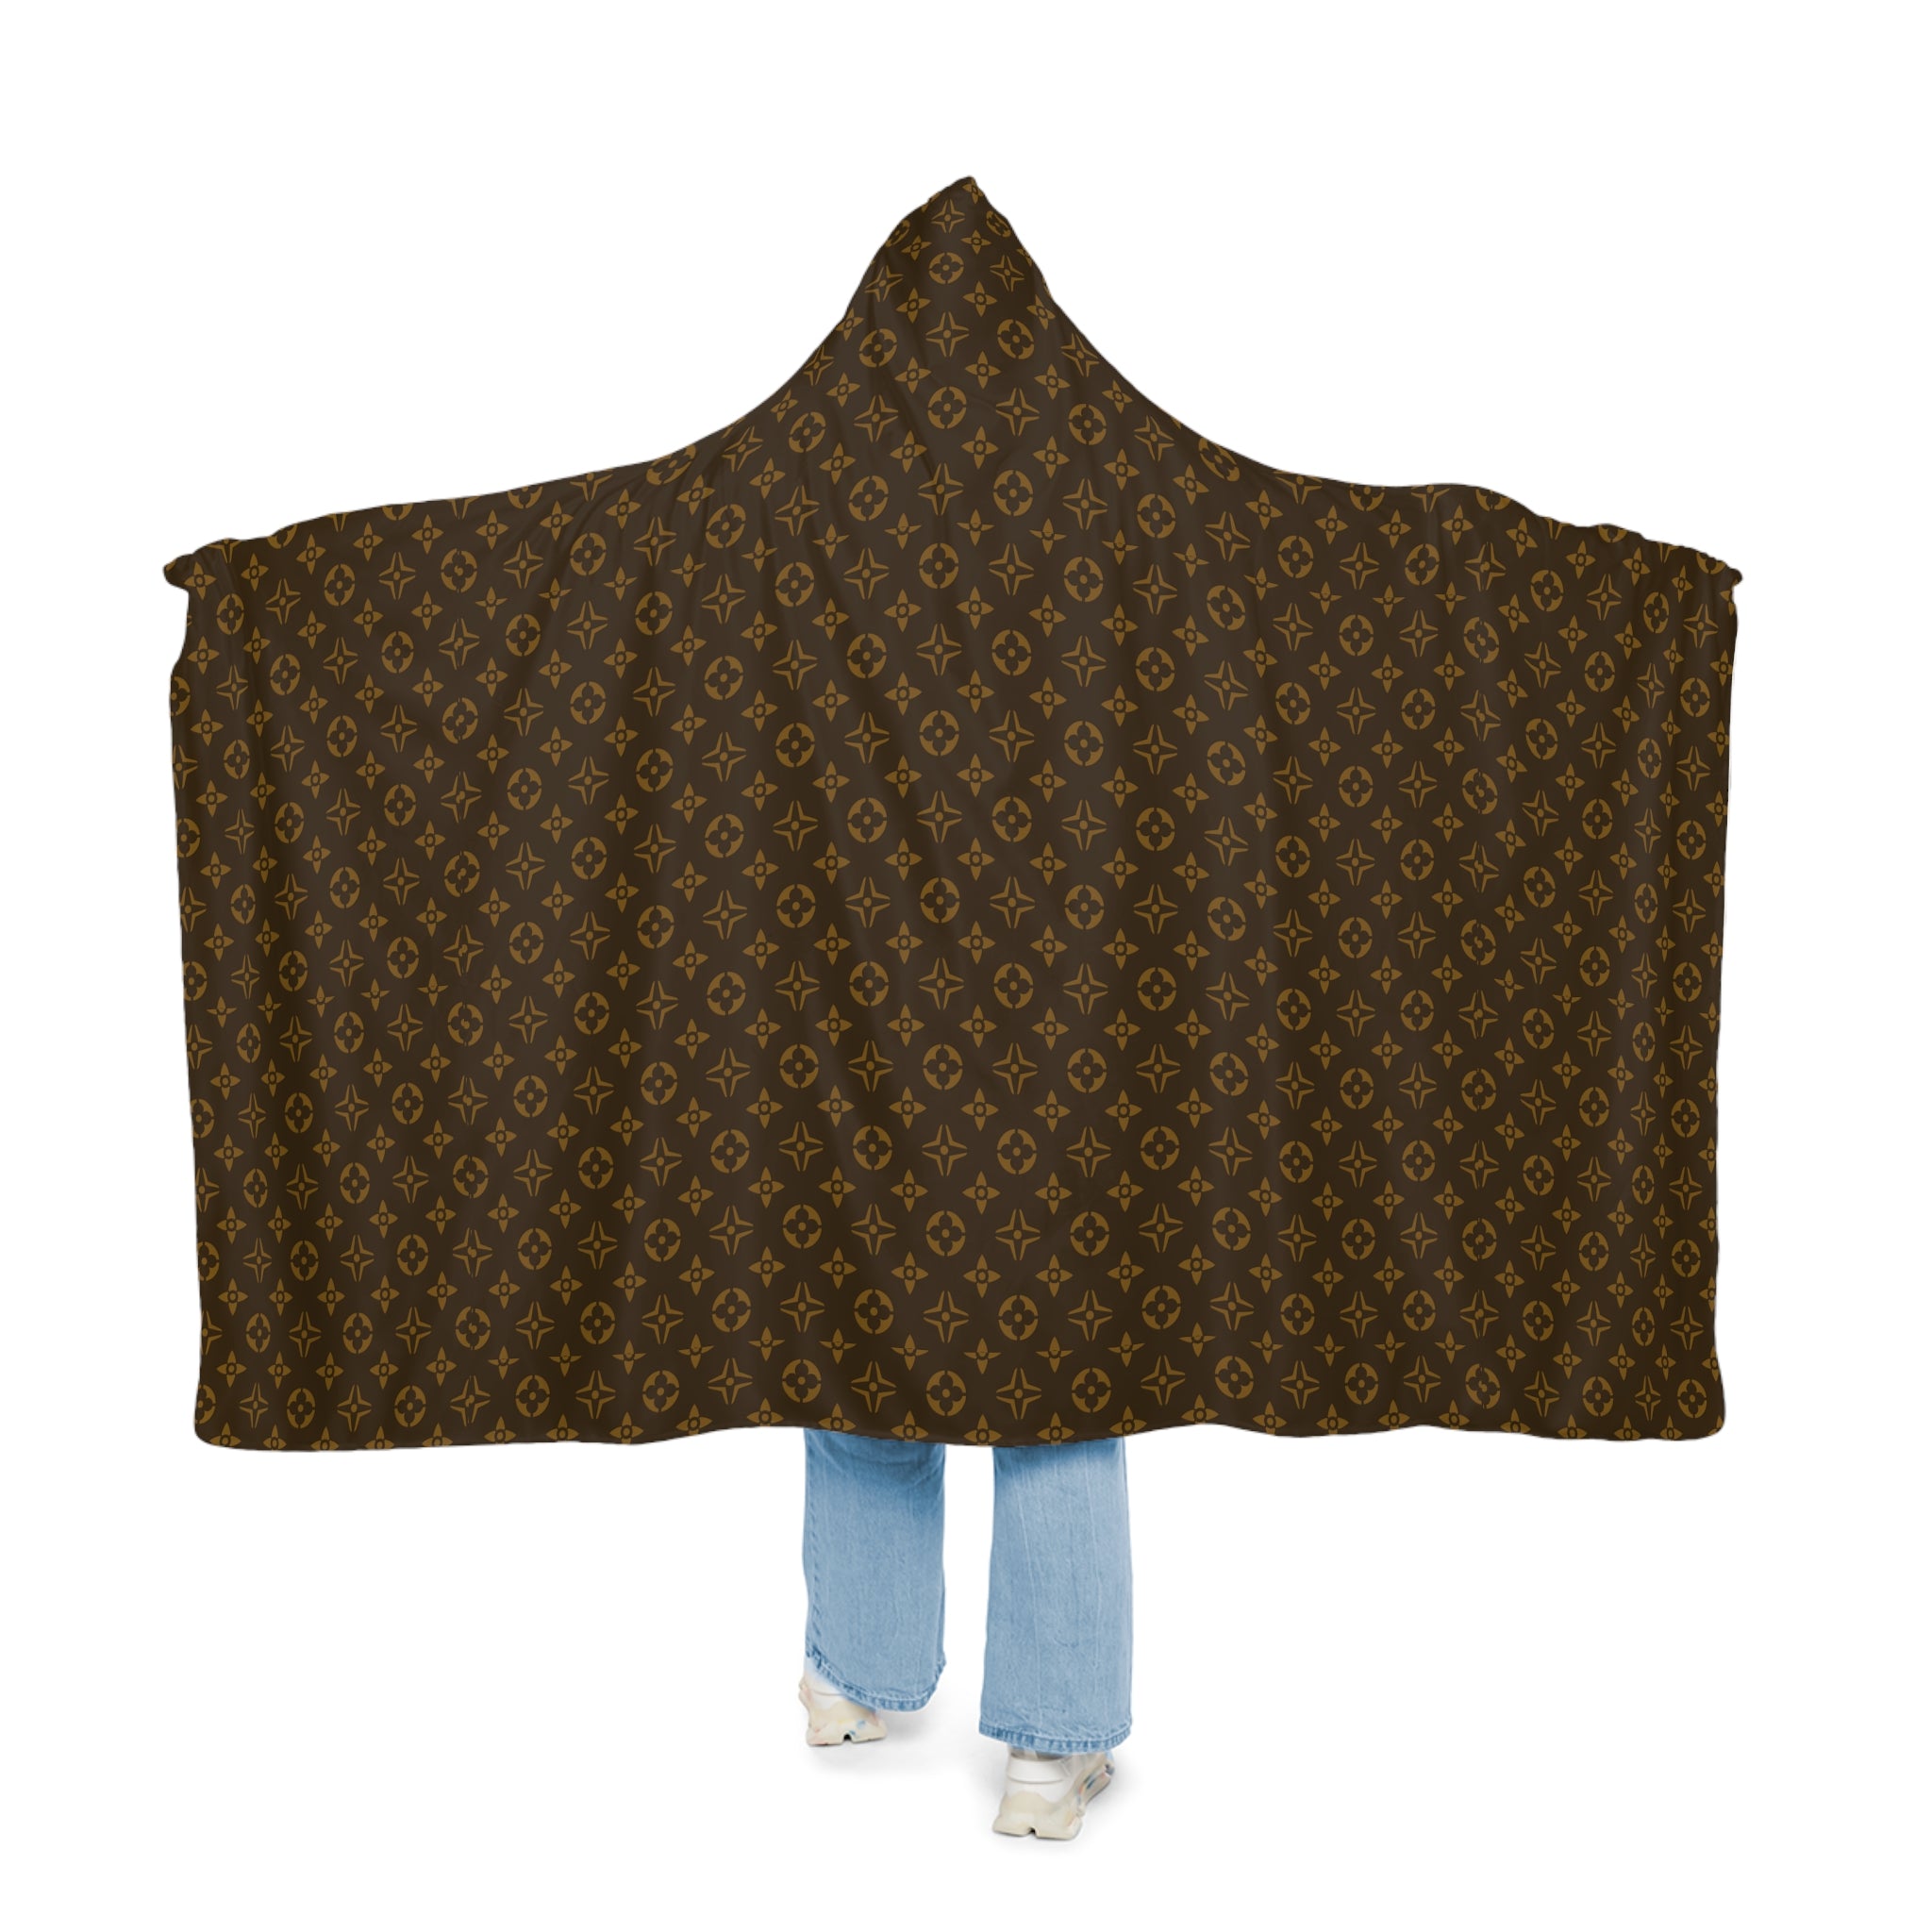 At Home Collection Large Brown and Gold Icon Snuggle Blanket, Hooded Sherpa, Oversized Hooded Cape All Over Prints 80-55-Microfiber-Fleece The Middle Aged Groove